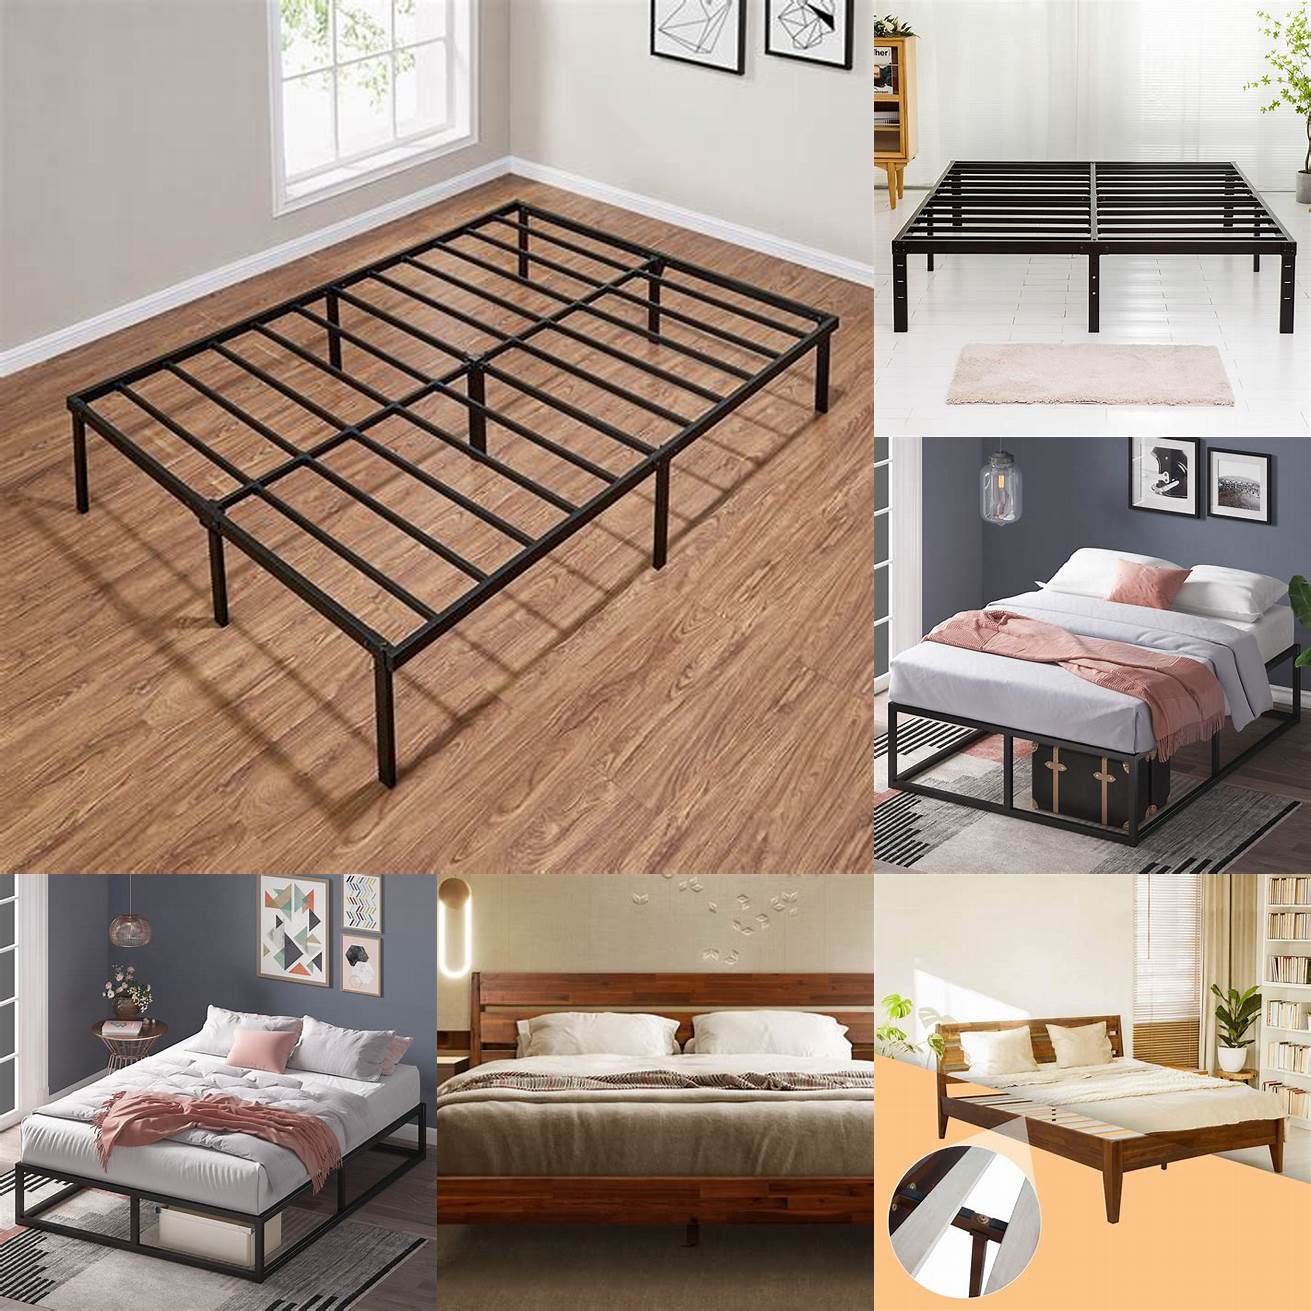 Sturdiness Bed frame kings are made with sturdy materials such as solid wood or metal to support the weight of the mattress and the sleepers